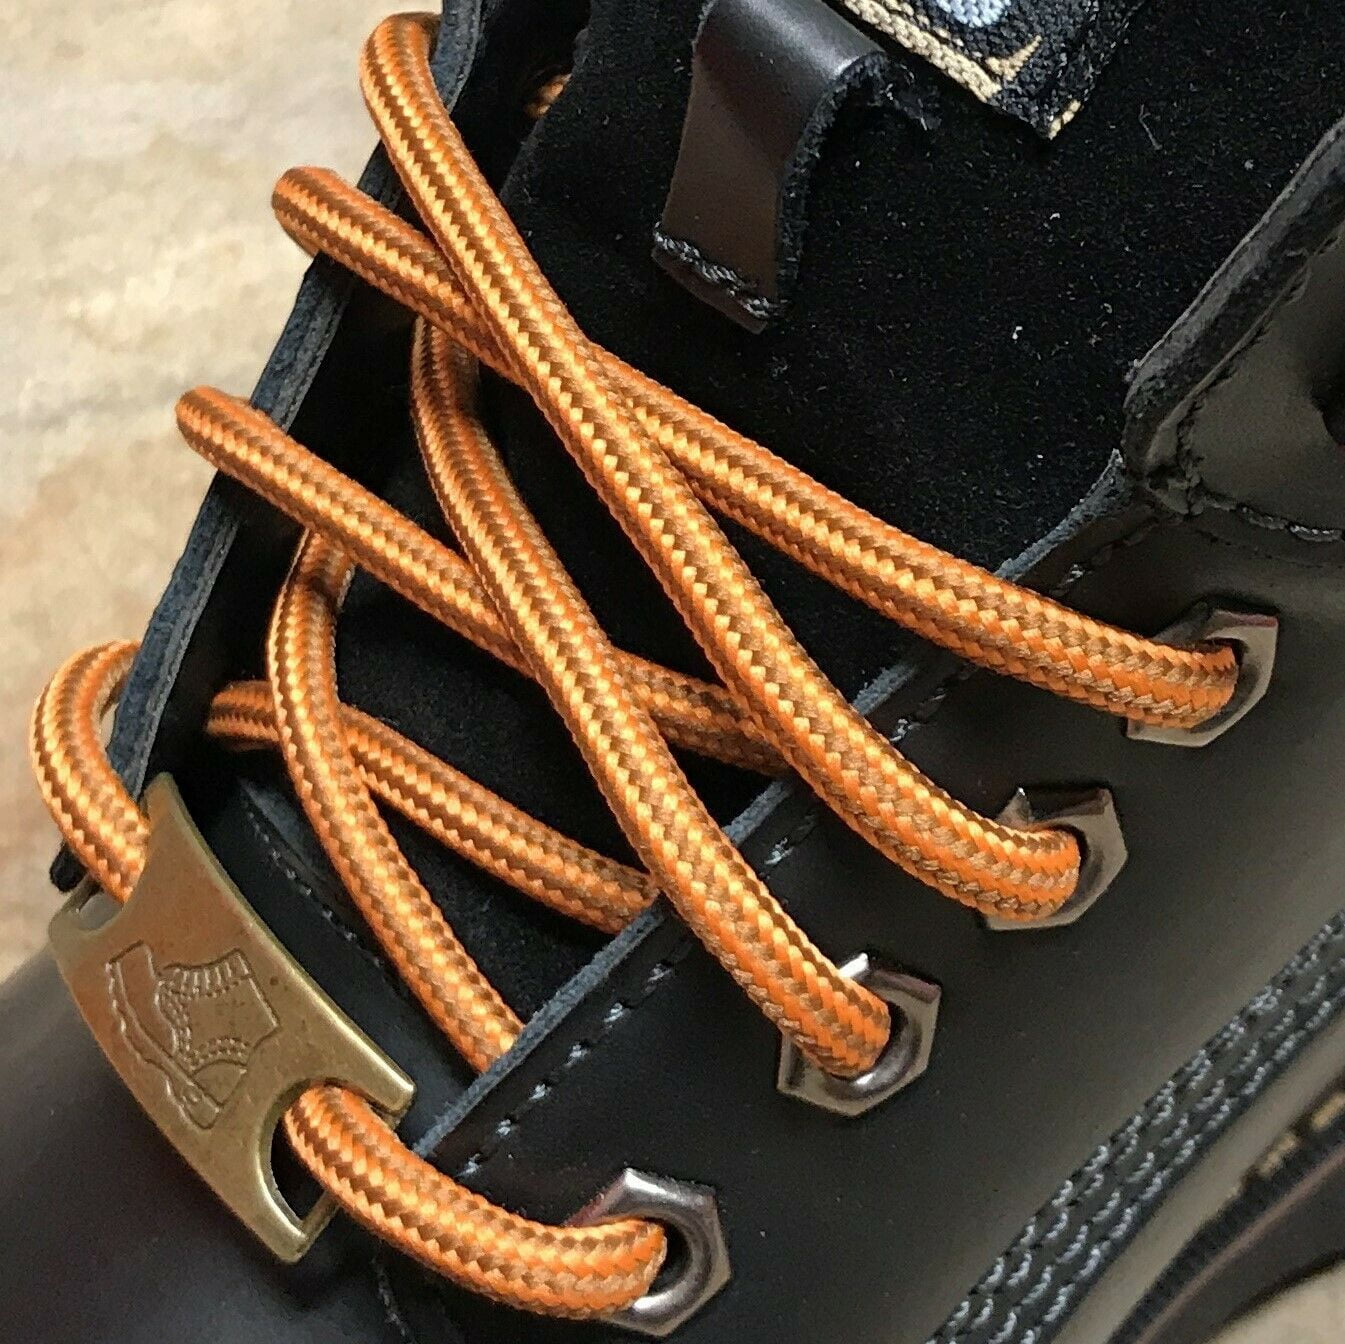 NEW 1 PAIR ROUND BLACK OR BROWN WORK SHOE BOOT LACES 60" OR 72" SHOESTRINGS